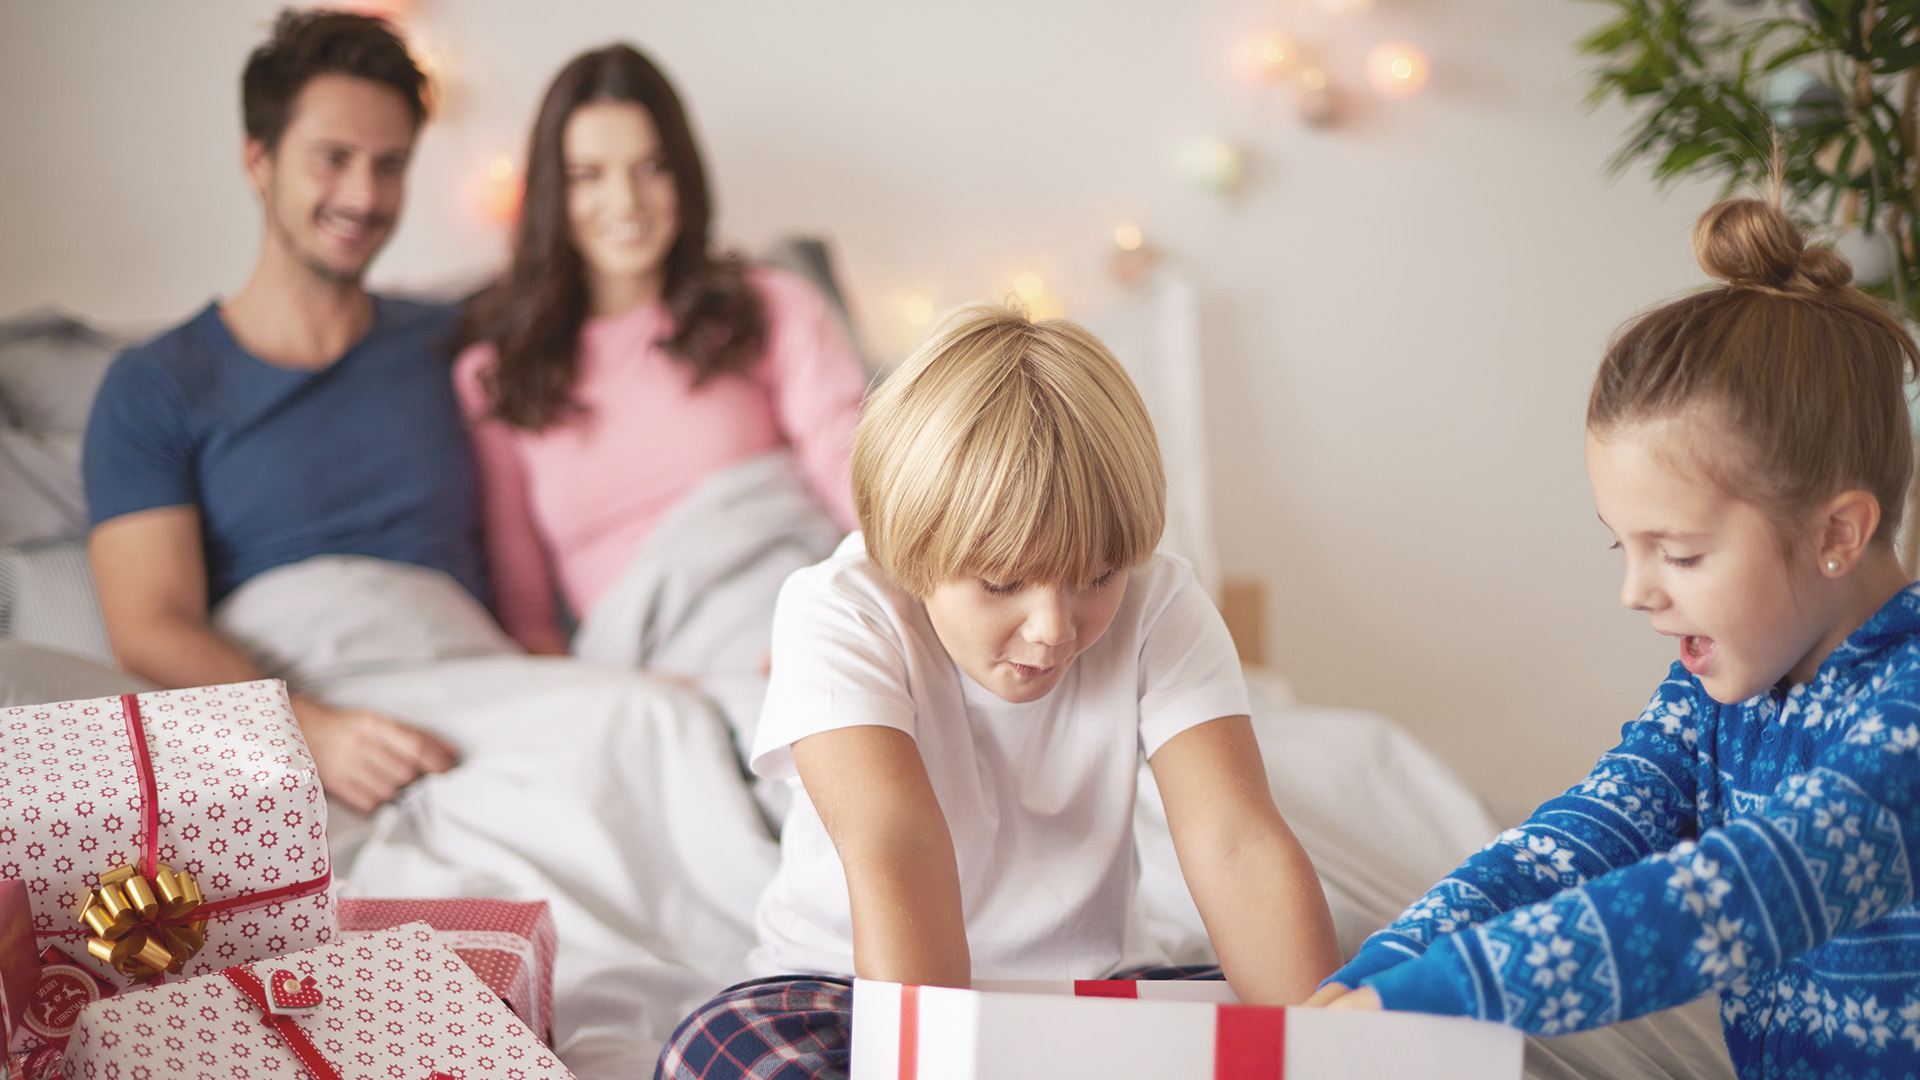 Fun and (Secretly) Healthy Holiday Gifts for Kids